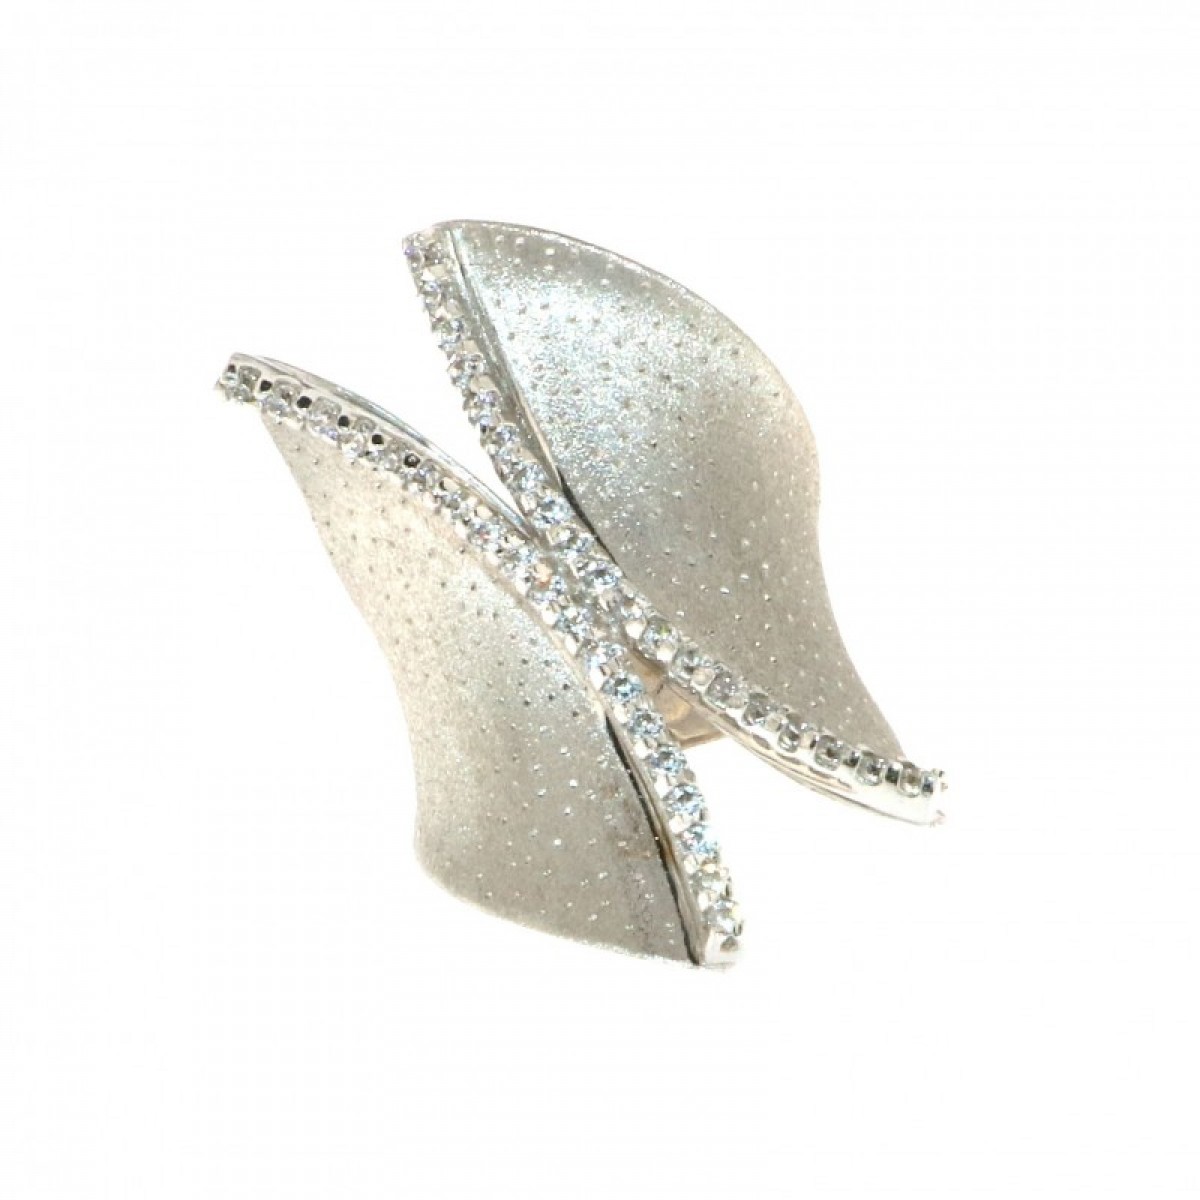 English Cubic Zirconia Ring (Pre-Owned)